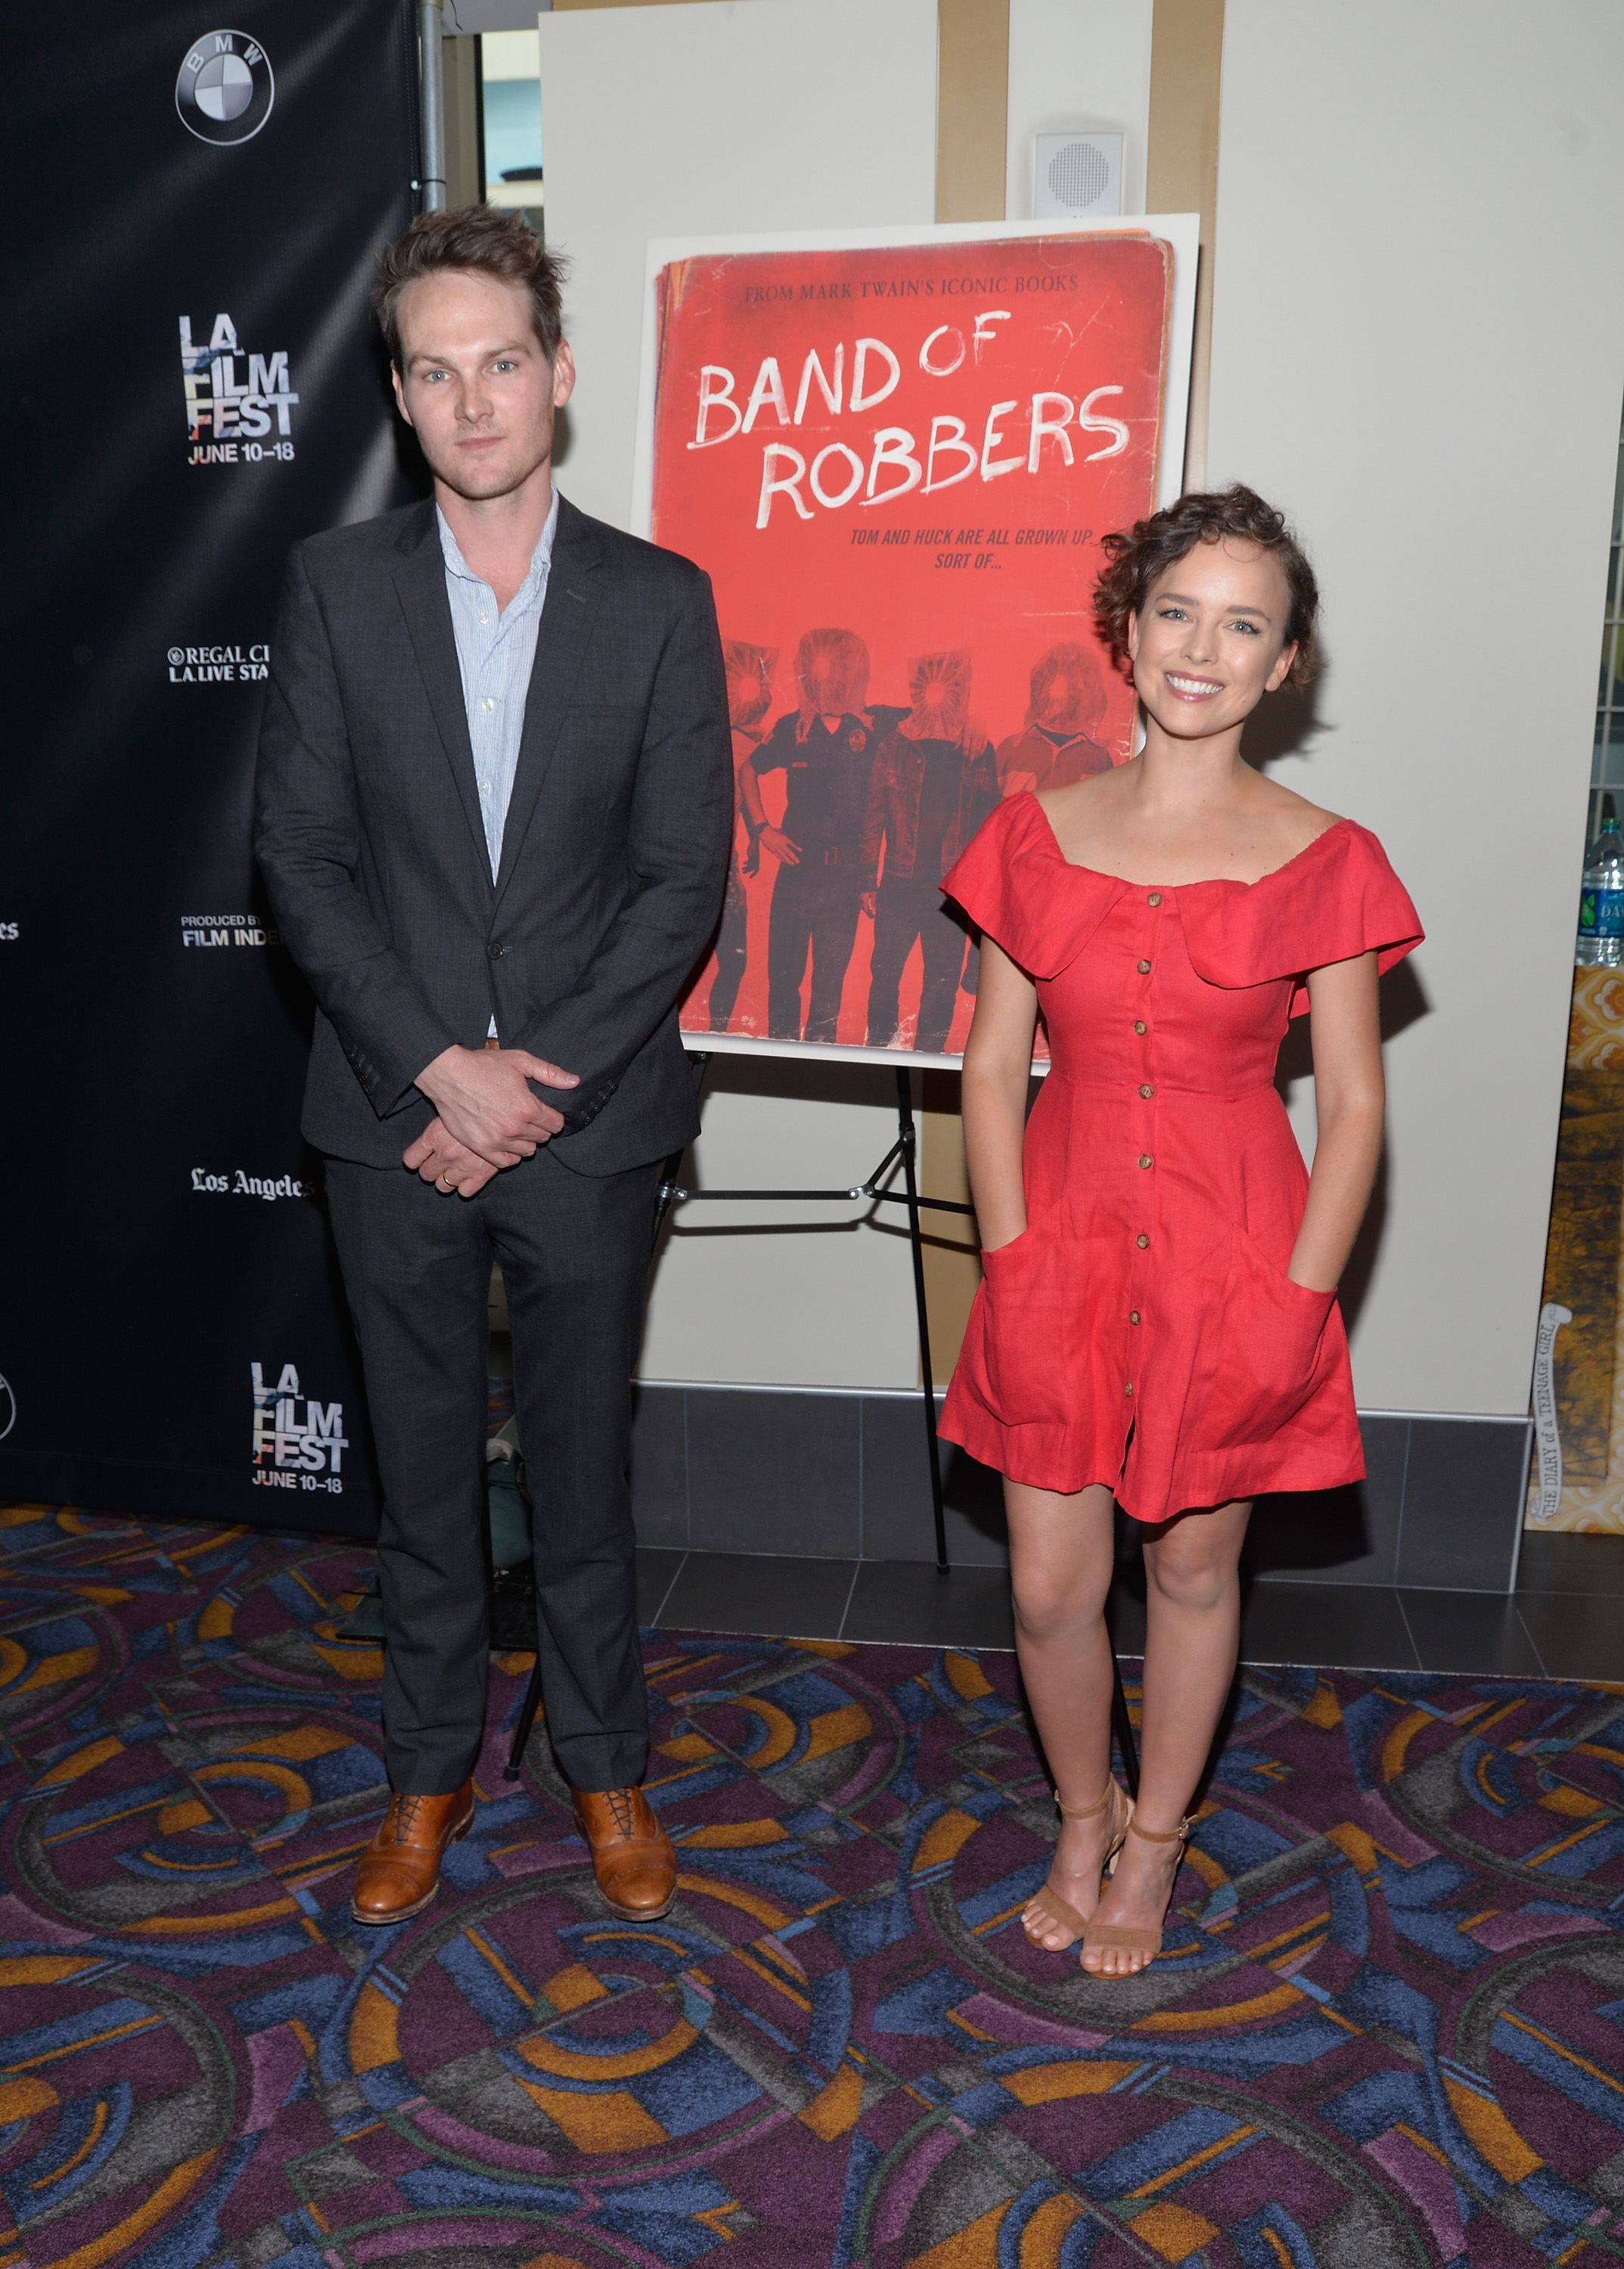 Adam Nee and Allison Miller at the LAFF world premiere of "Band of Robbers" in 2015 in Los Angeles, California. | Source: Getty Images